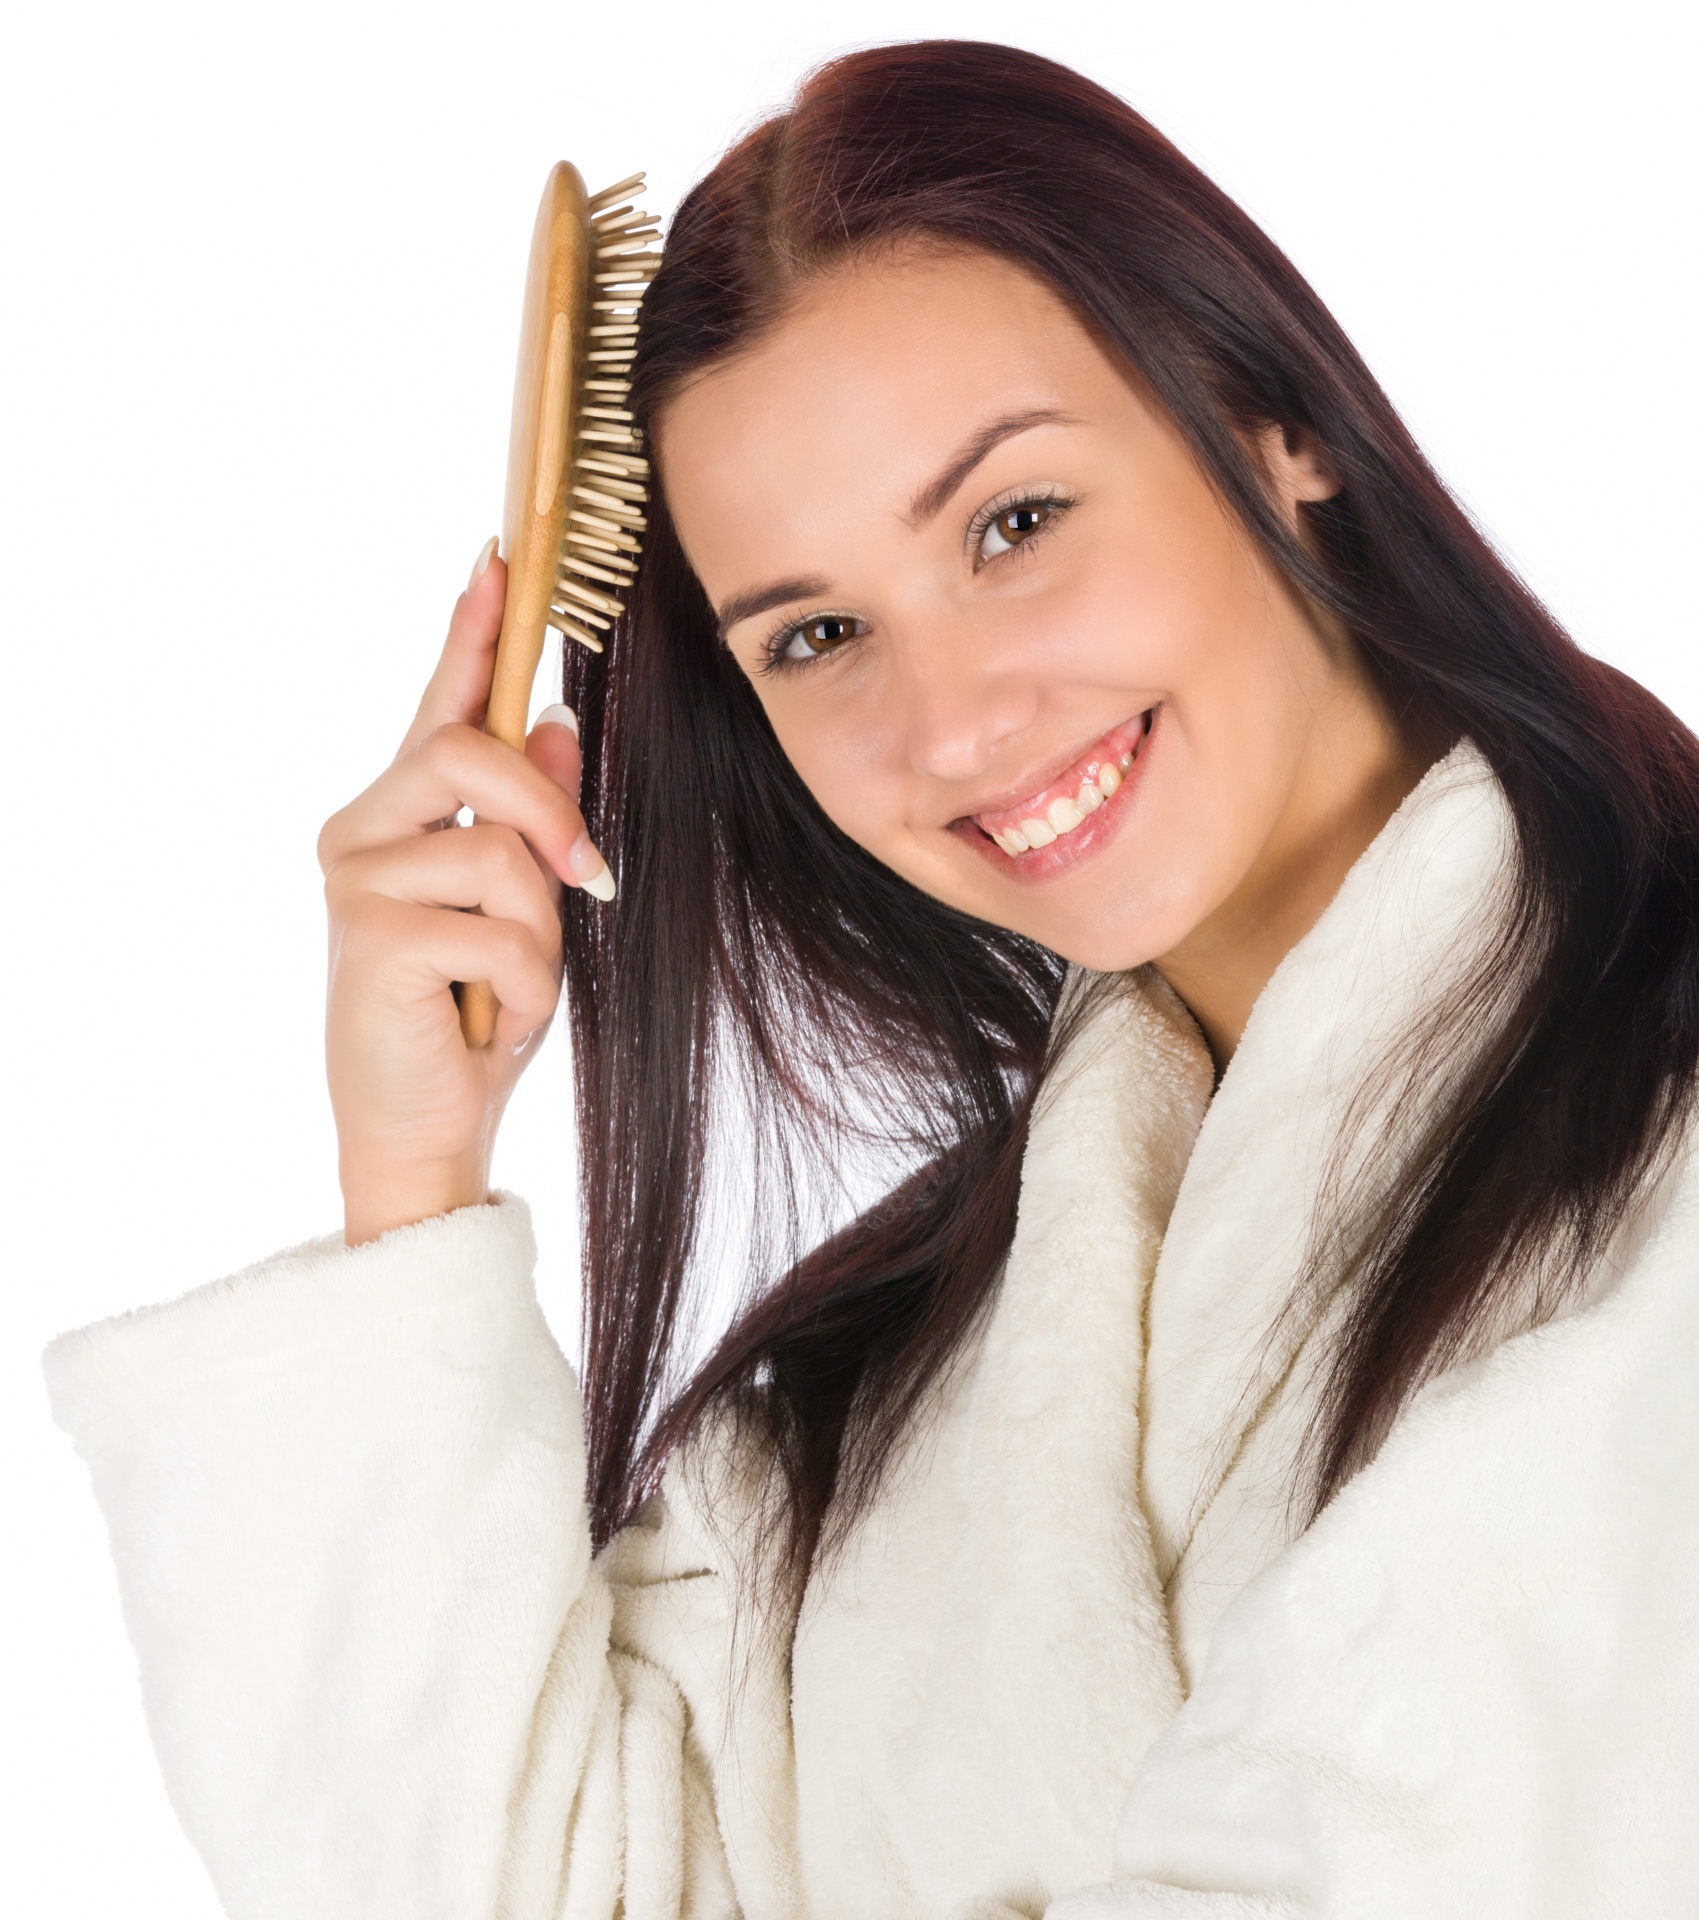 Young woman in a robe brushing her hair isolated on white background